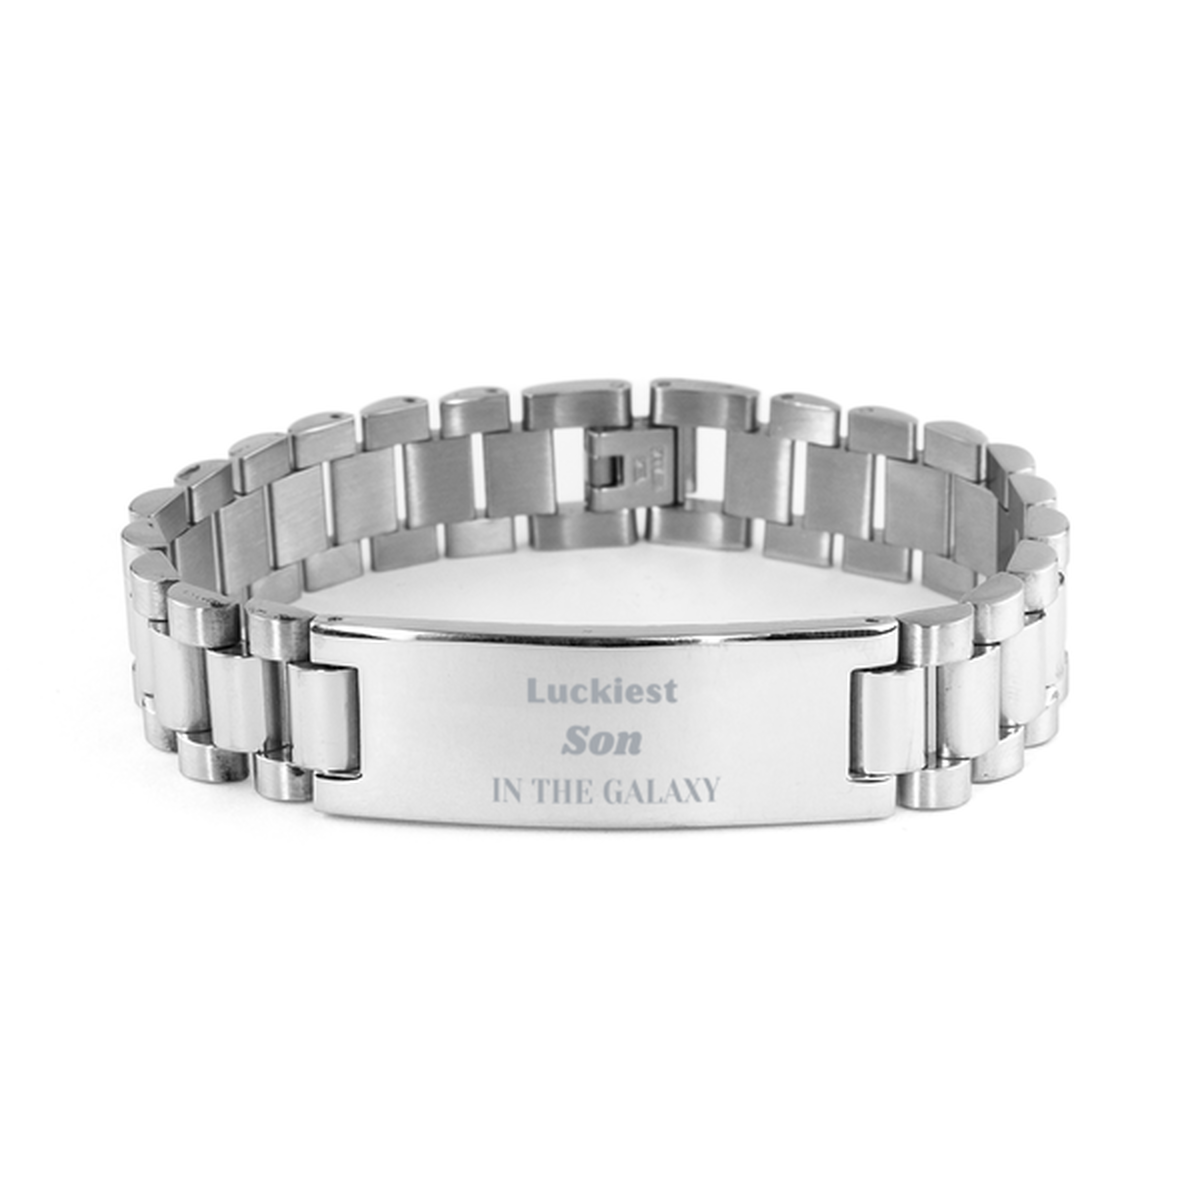 Luckiest Son in the Galaxy, To My Son Engraved Gifts, Christmas Son Ladder Stainless Steel Bracelet Gifts, X-mas Birthday Unique Gifts For Son Men Women